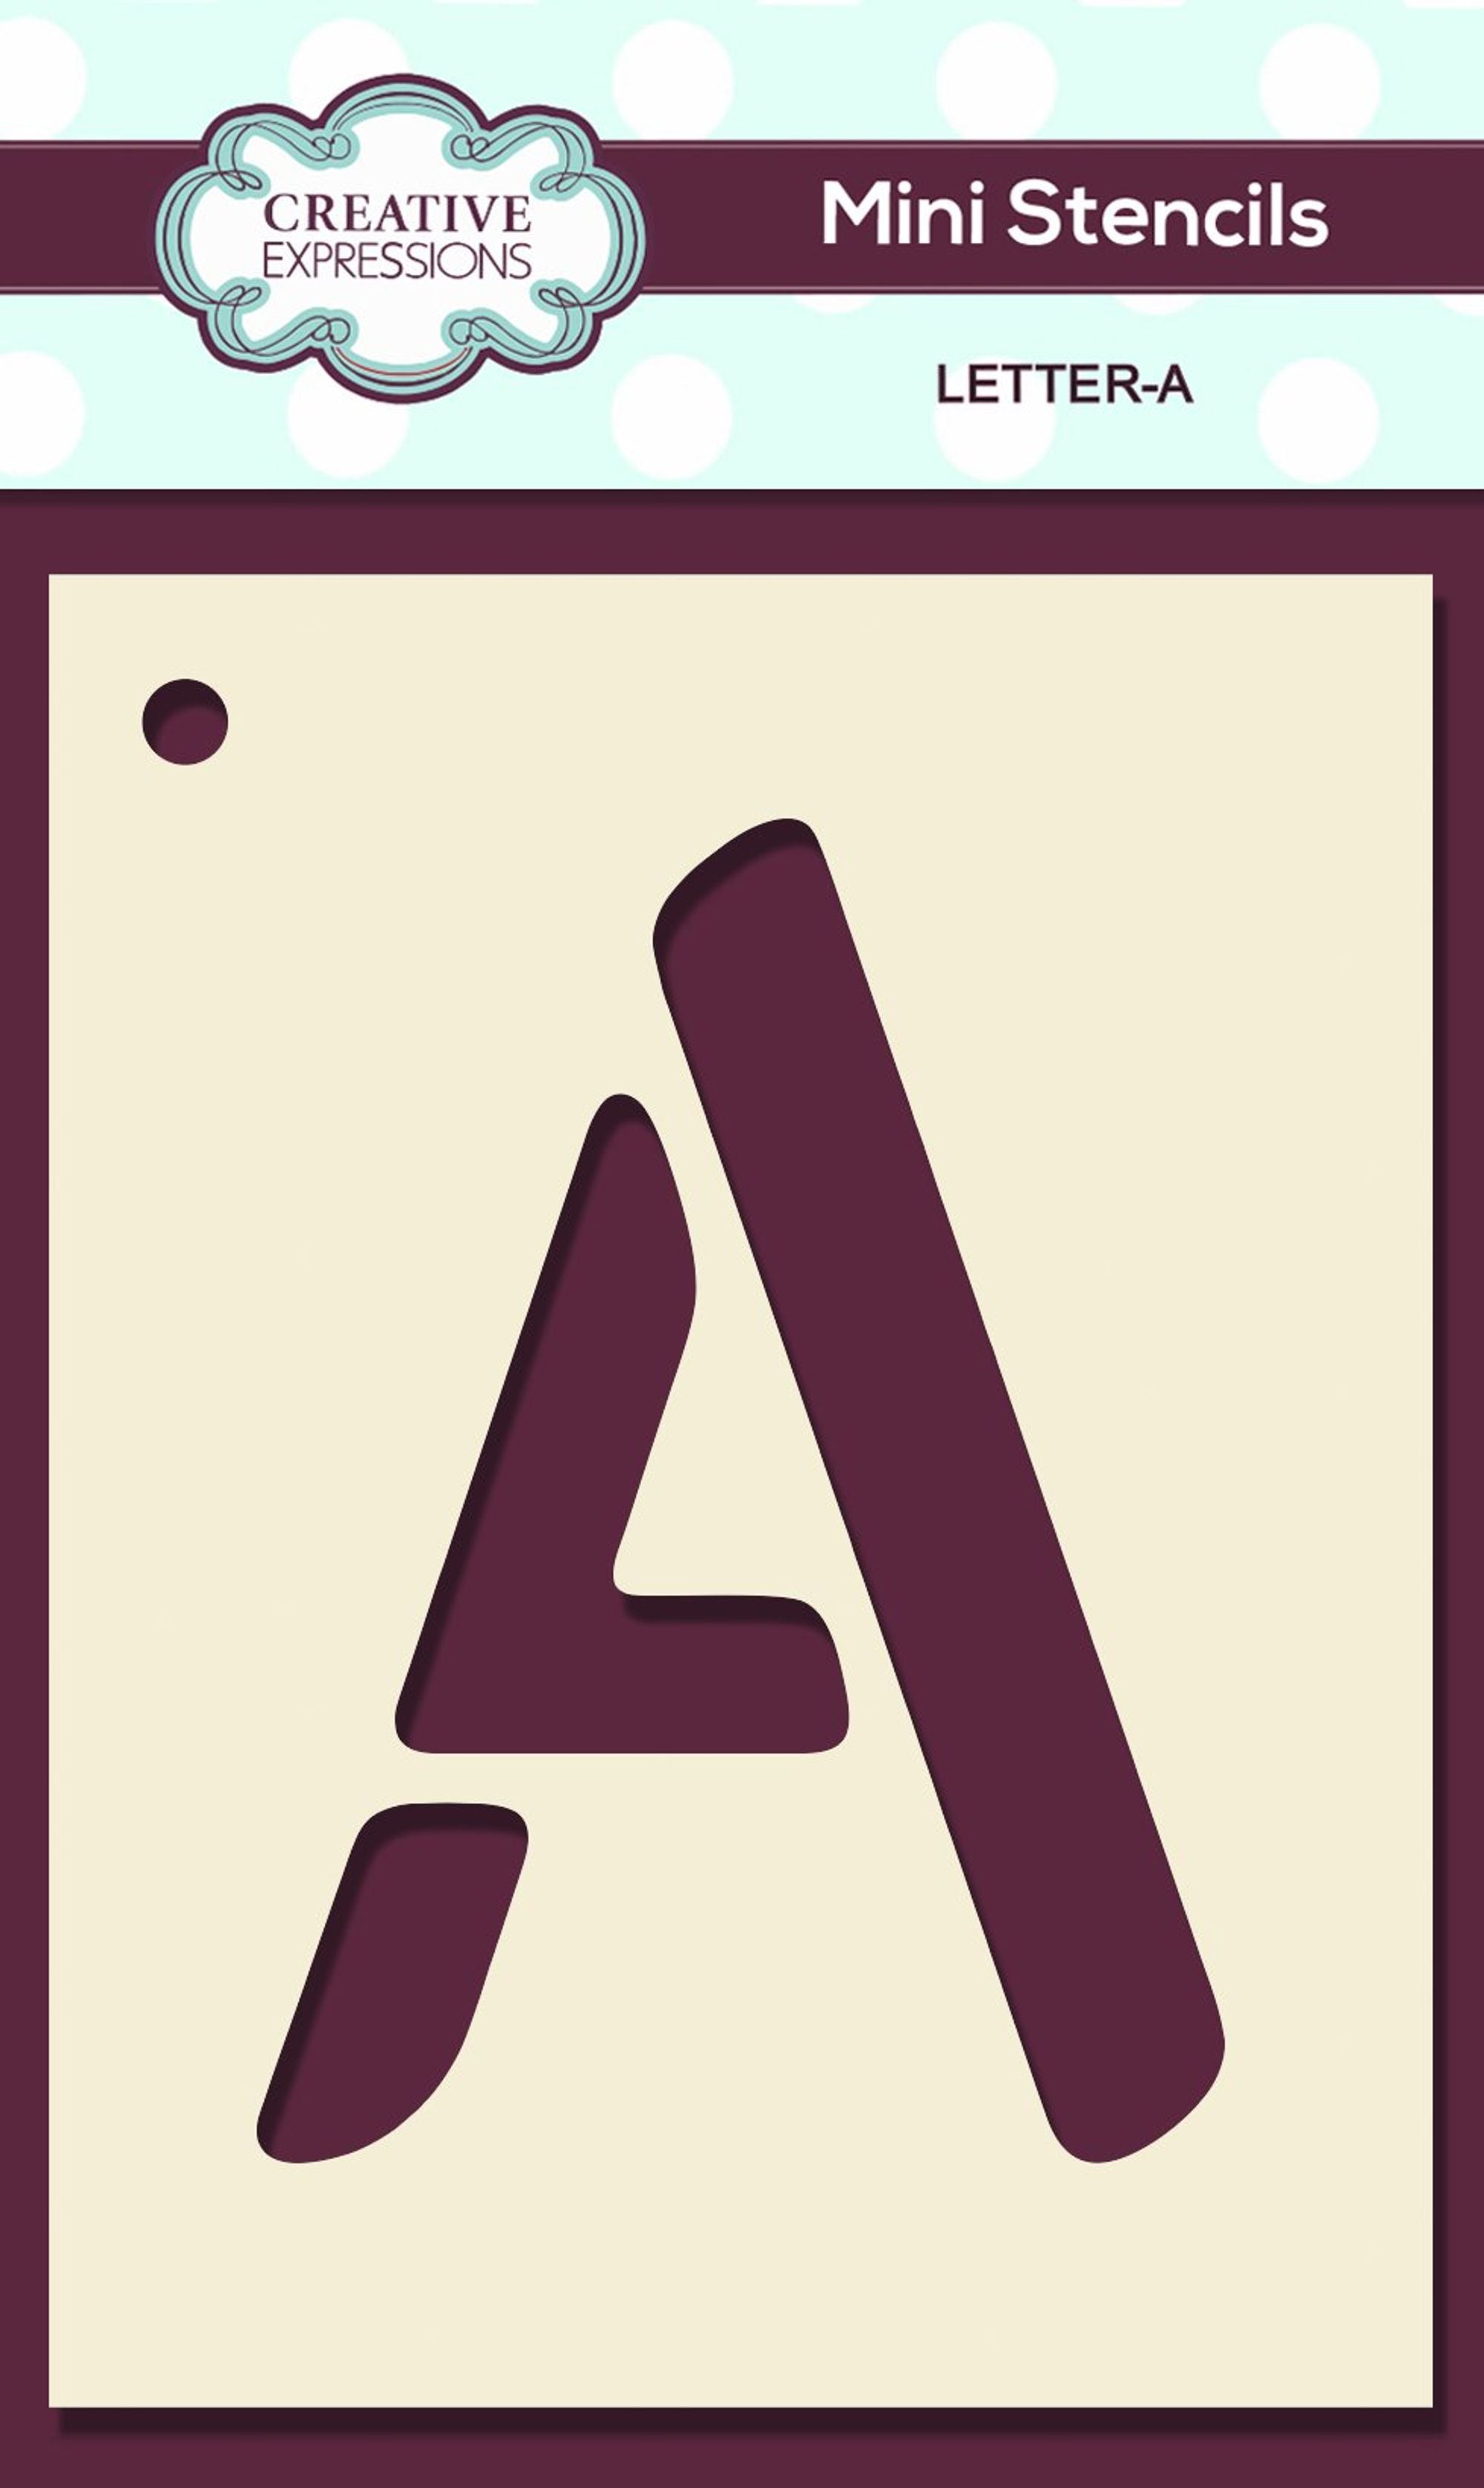 #Letter_A